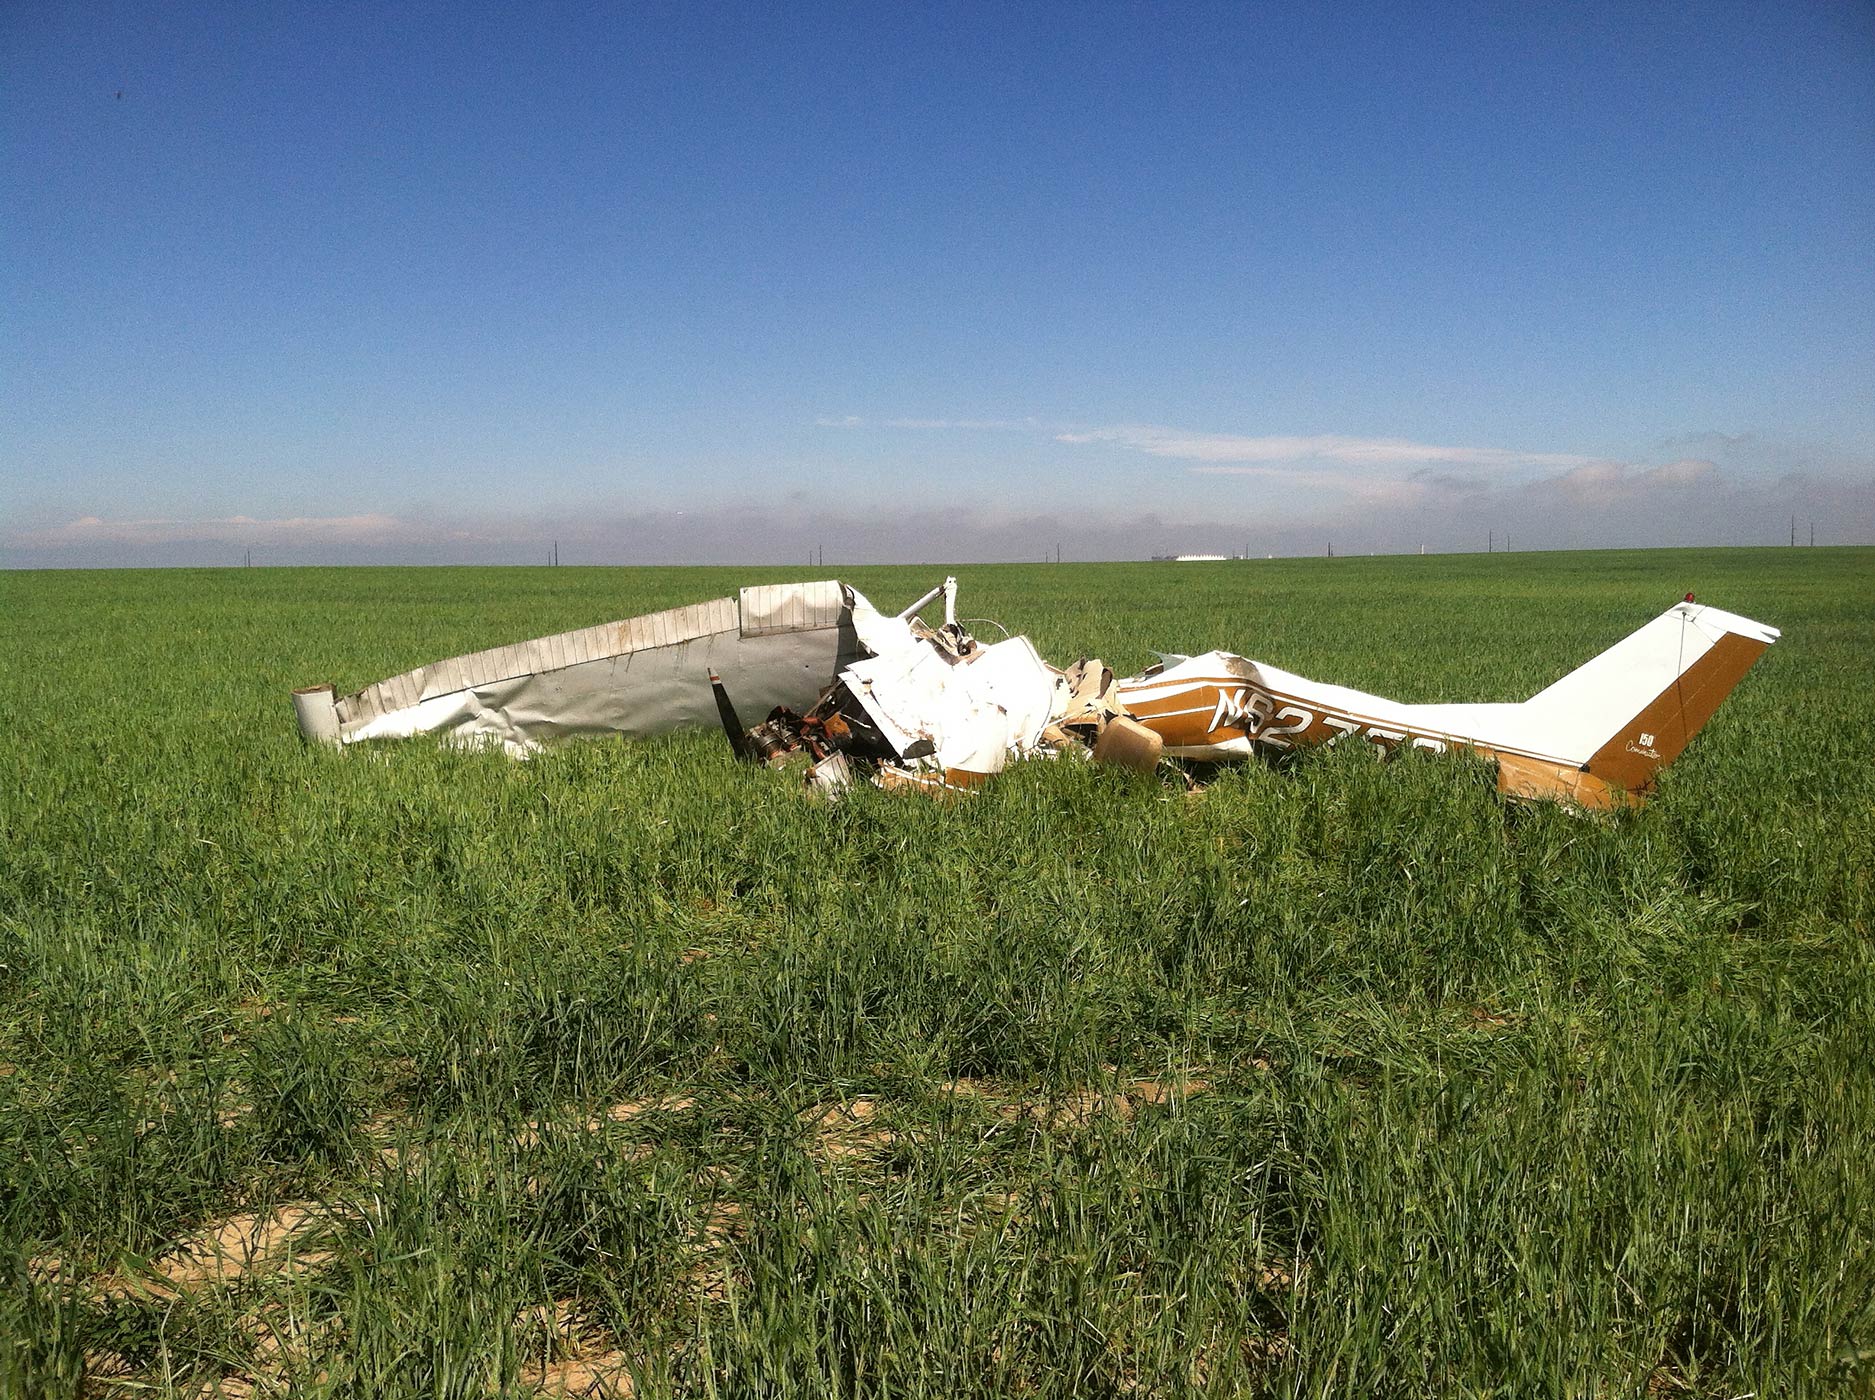 The wreckage of a crashed Cessna 150 airplane lies in a field near Watkins, Co. on May 31, 2014. (Sgt Aaron Pataluna—Adams County Sheriff/Reuters)